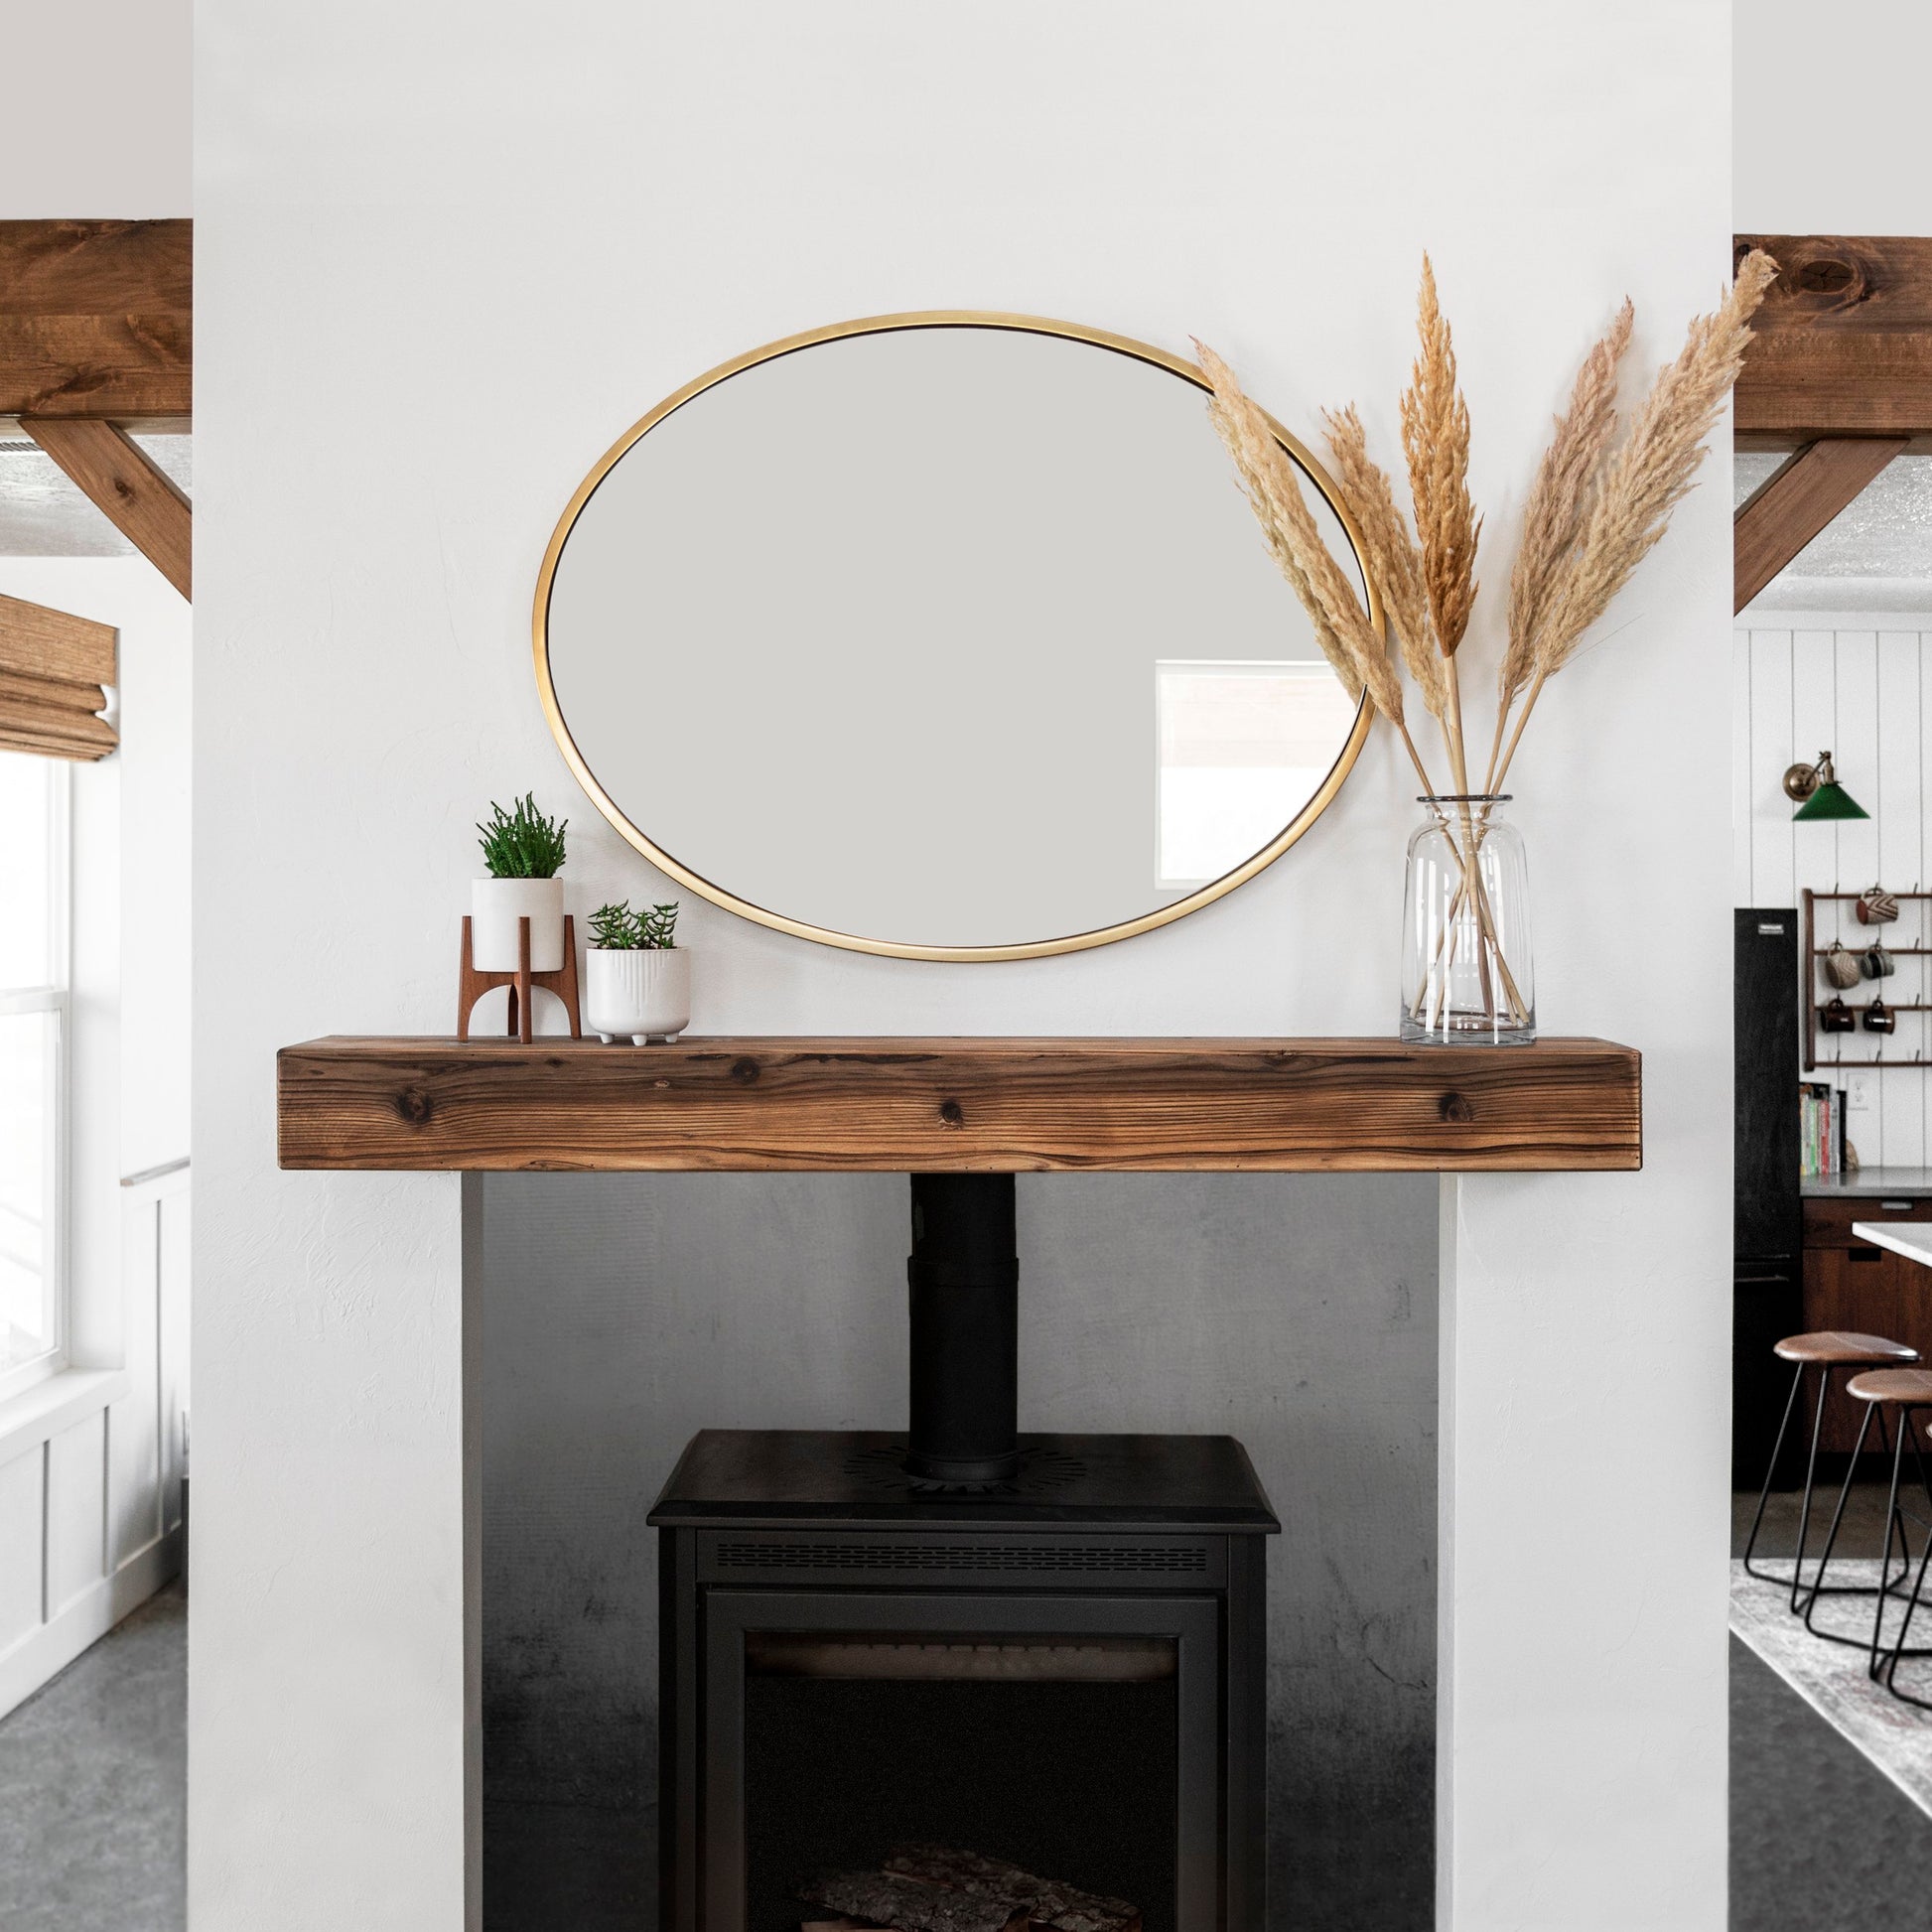 Burnt Almond weathered beam wood mantel above a fireplace